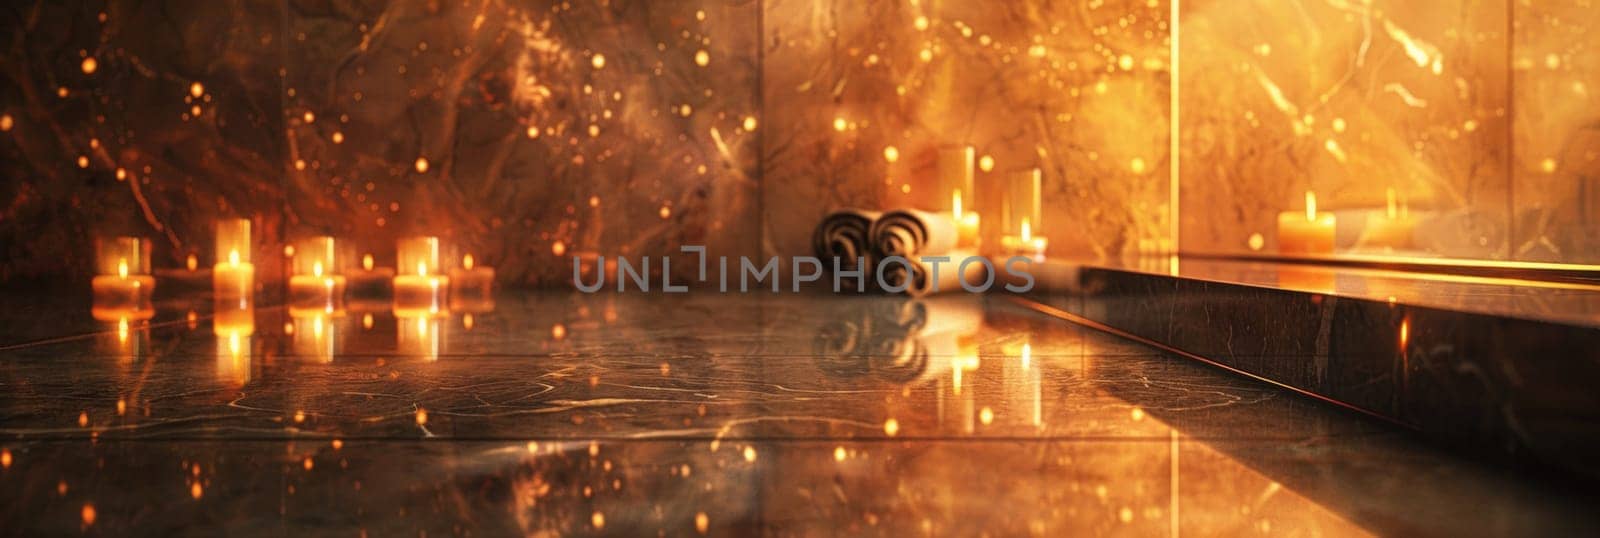 A bathroom with candles lit on the floor and a mirror